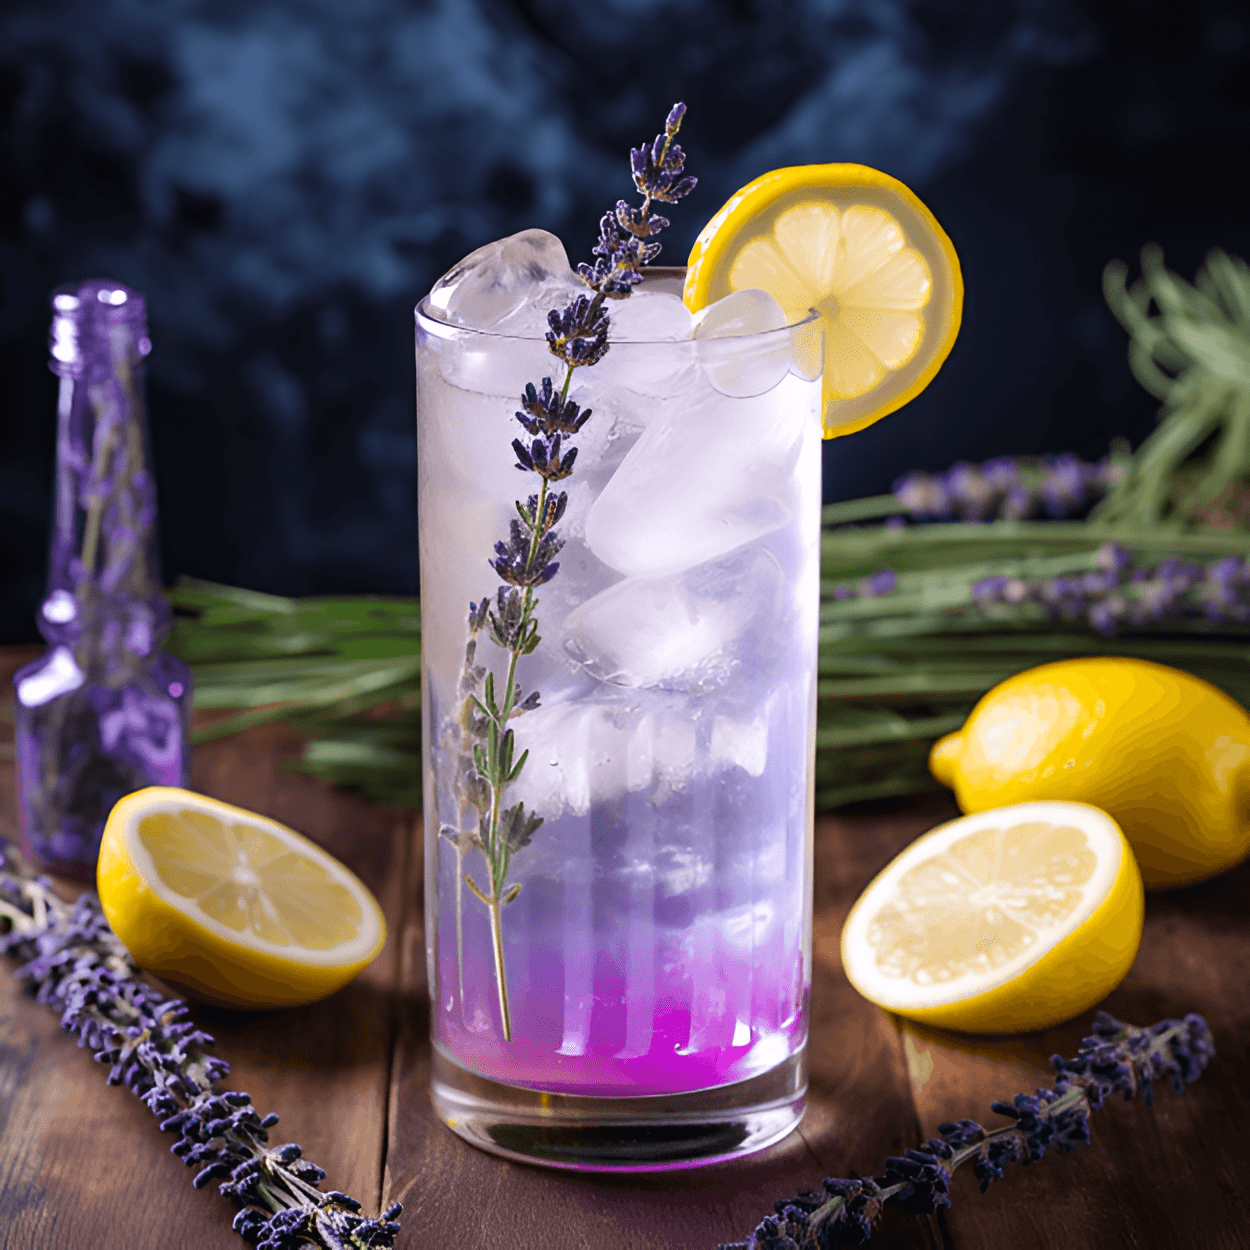 Lavender Haze Cocktail Recipe - The Lavender Haze cocktail has a light, floral taste with a hint of citrus. It's slightly sweet, but not overly so, with the lavender and lemon balancing each other out perfectly. The gin adds a subtle kick, making it a refreshing and invigorating drink.